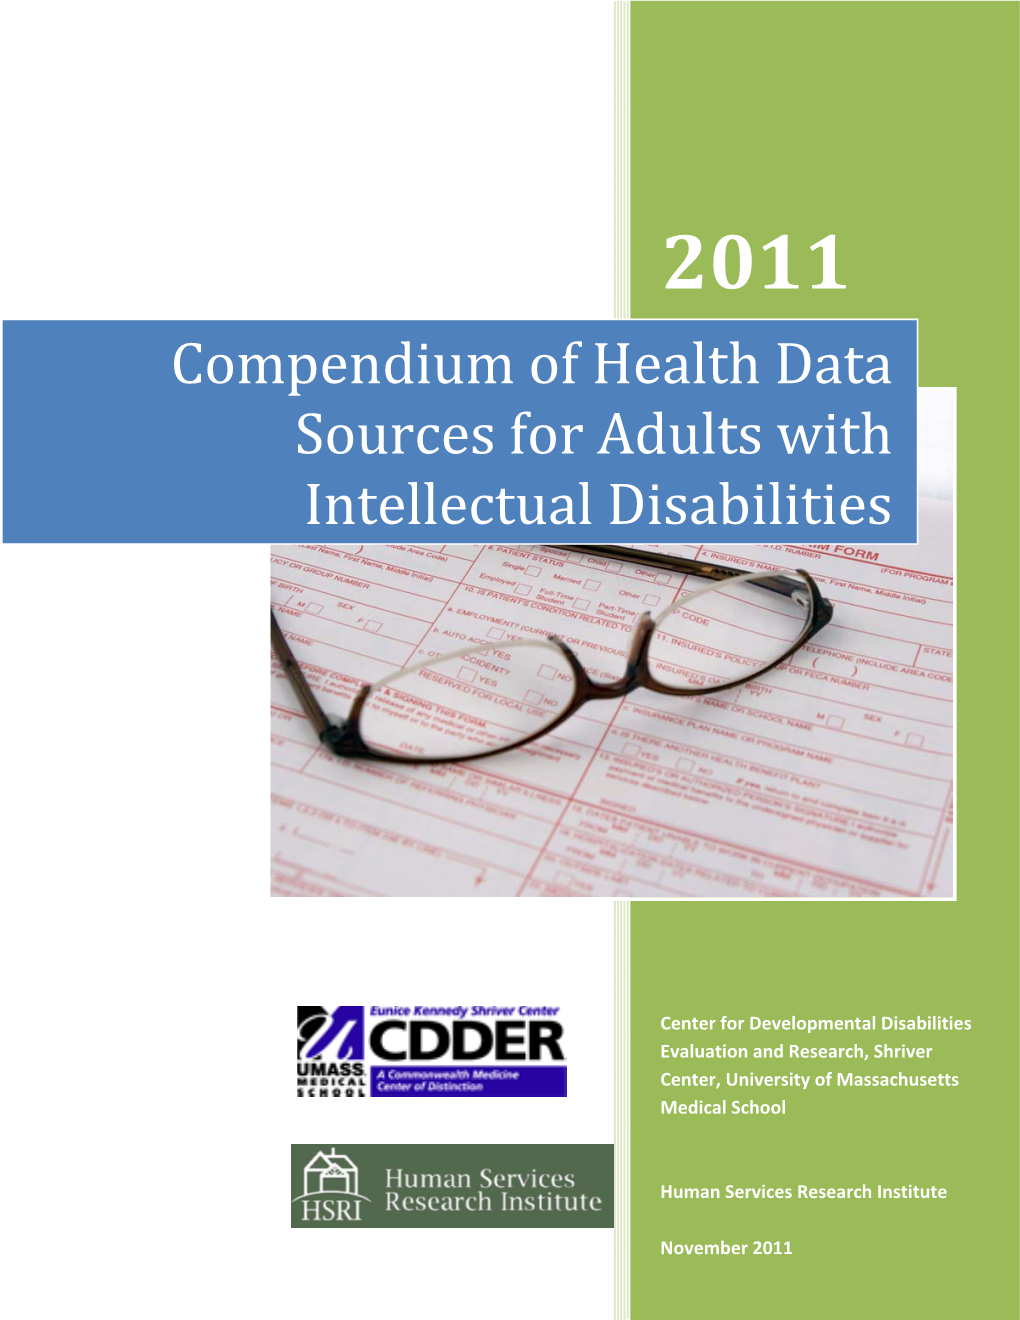 Compendium of Health Data Sources for Adults with Intellectual Disabilities